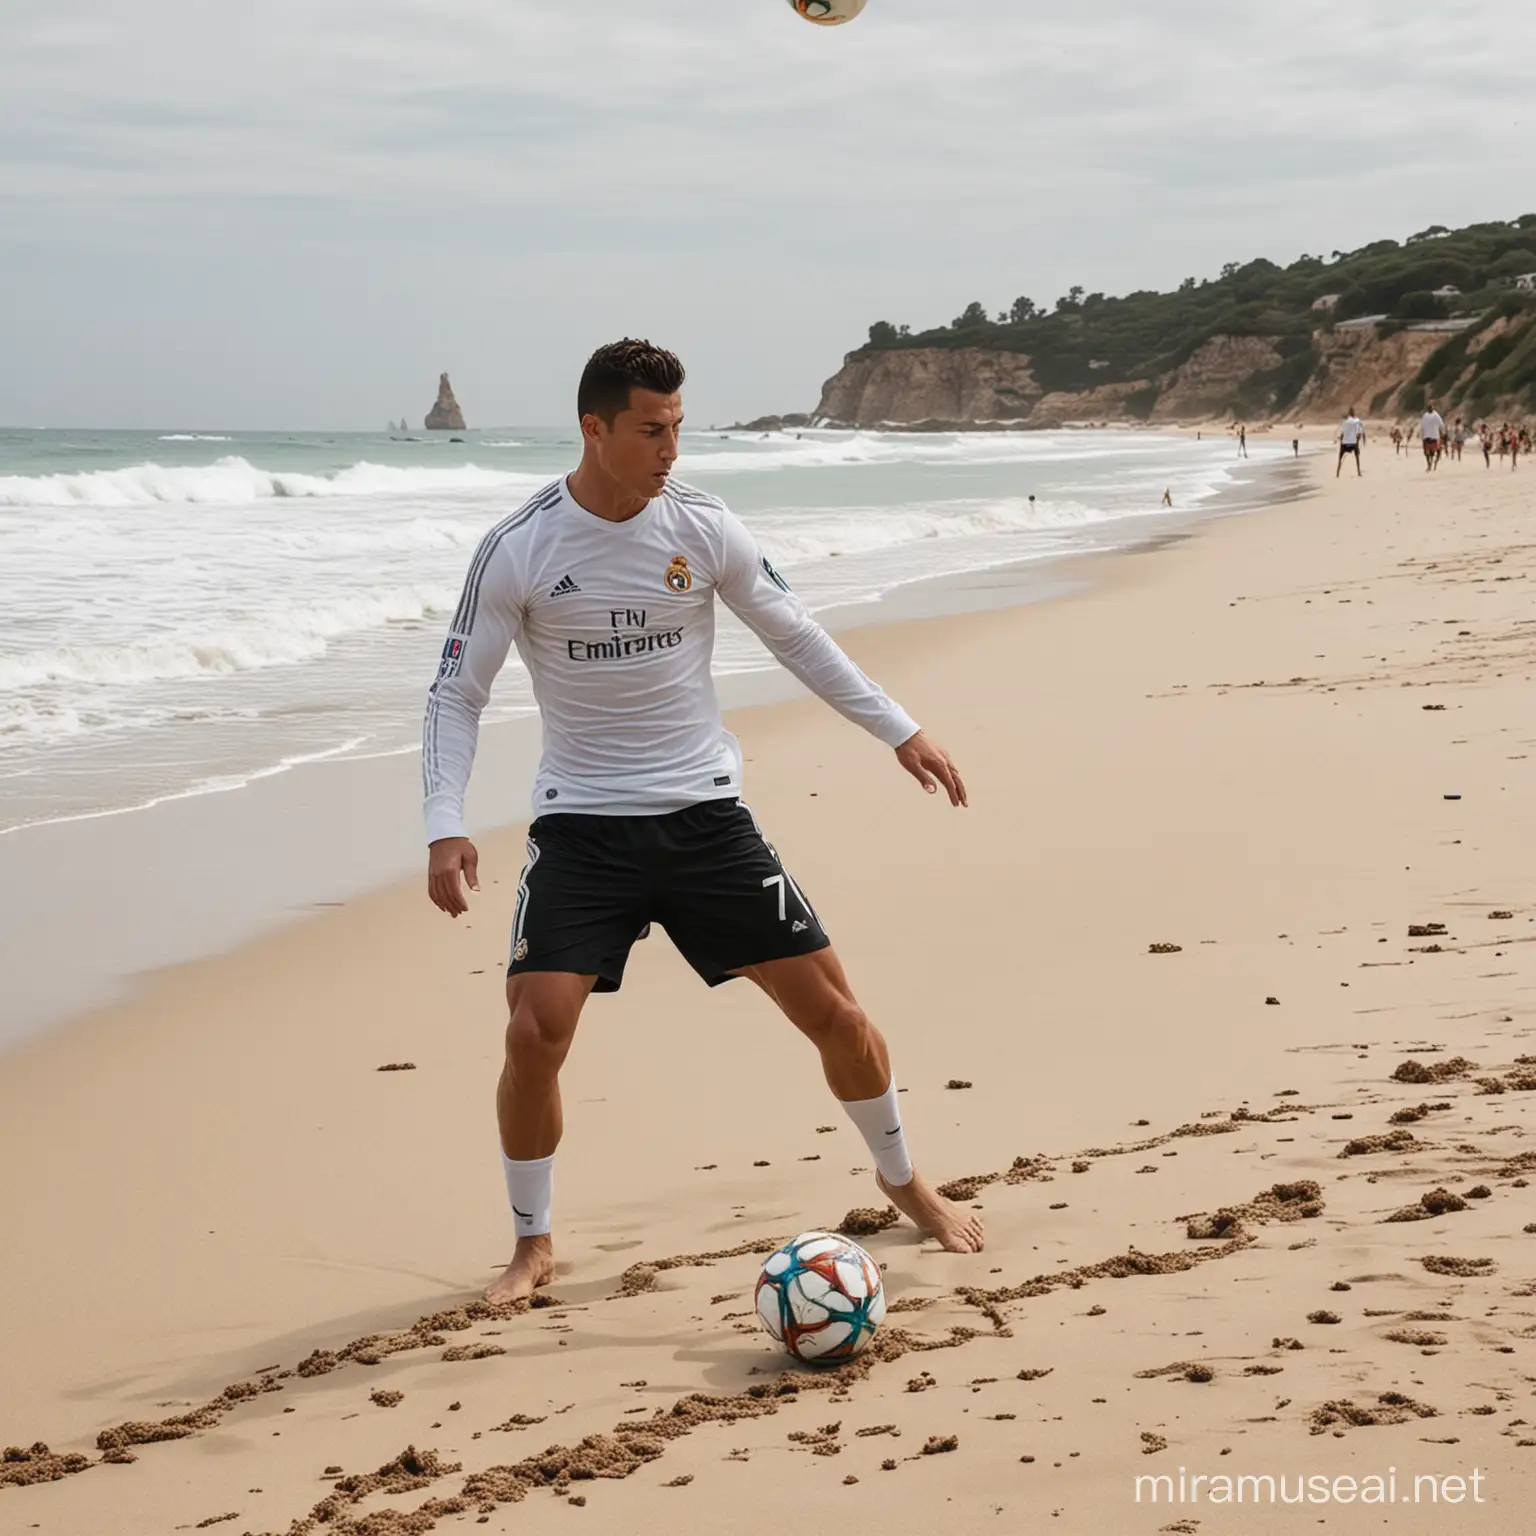 Cristiano Ronaldo trains on a secluded beach, perfecting his free kick technique.